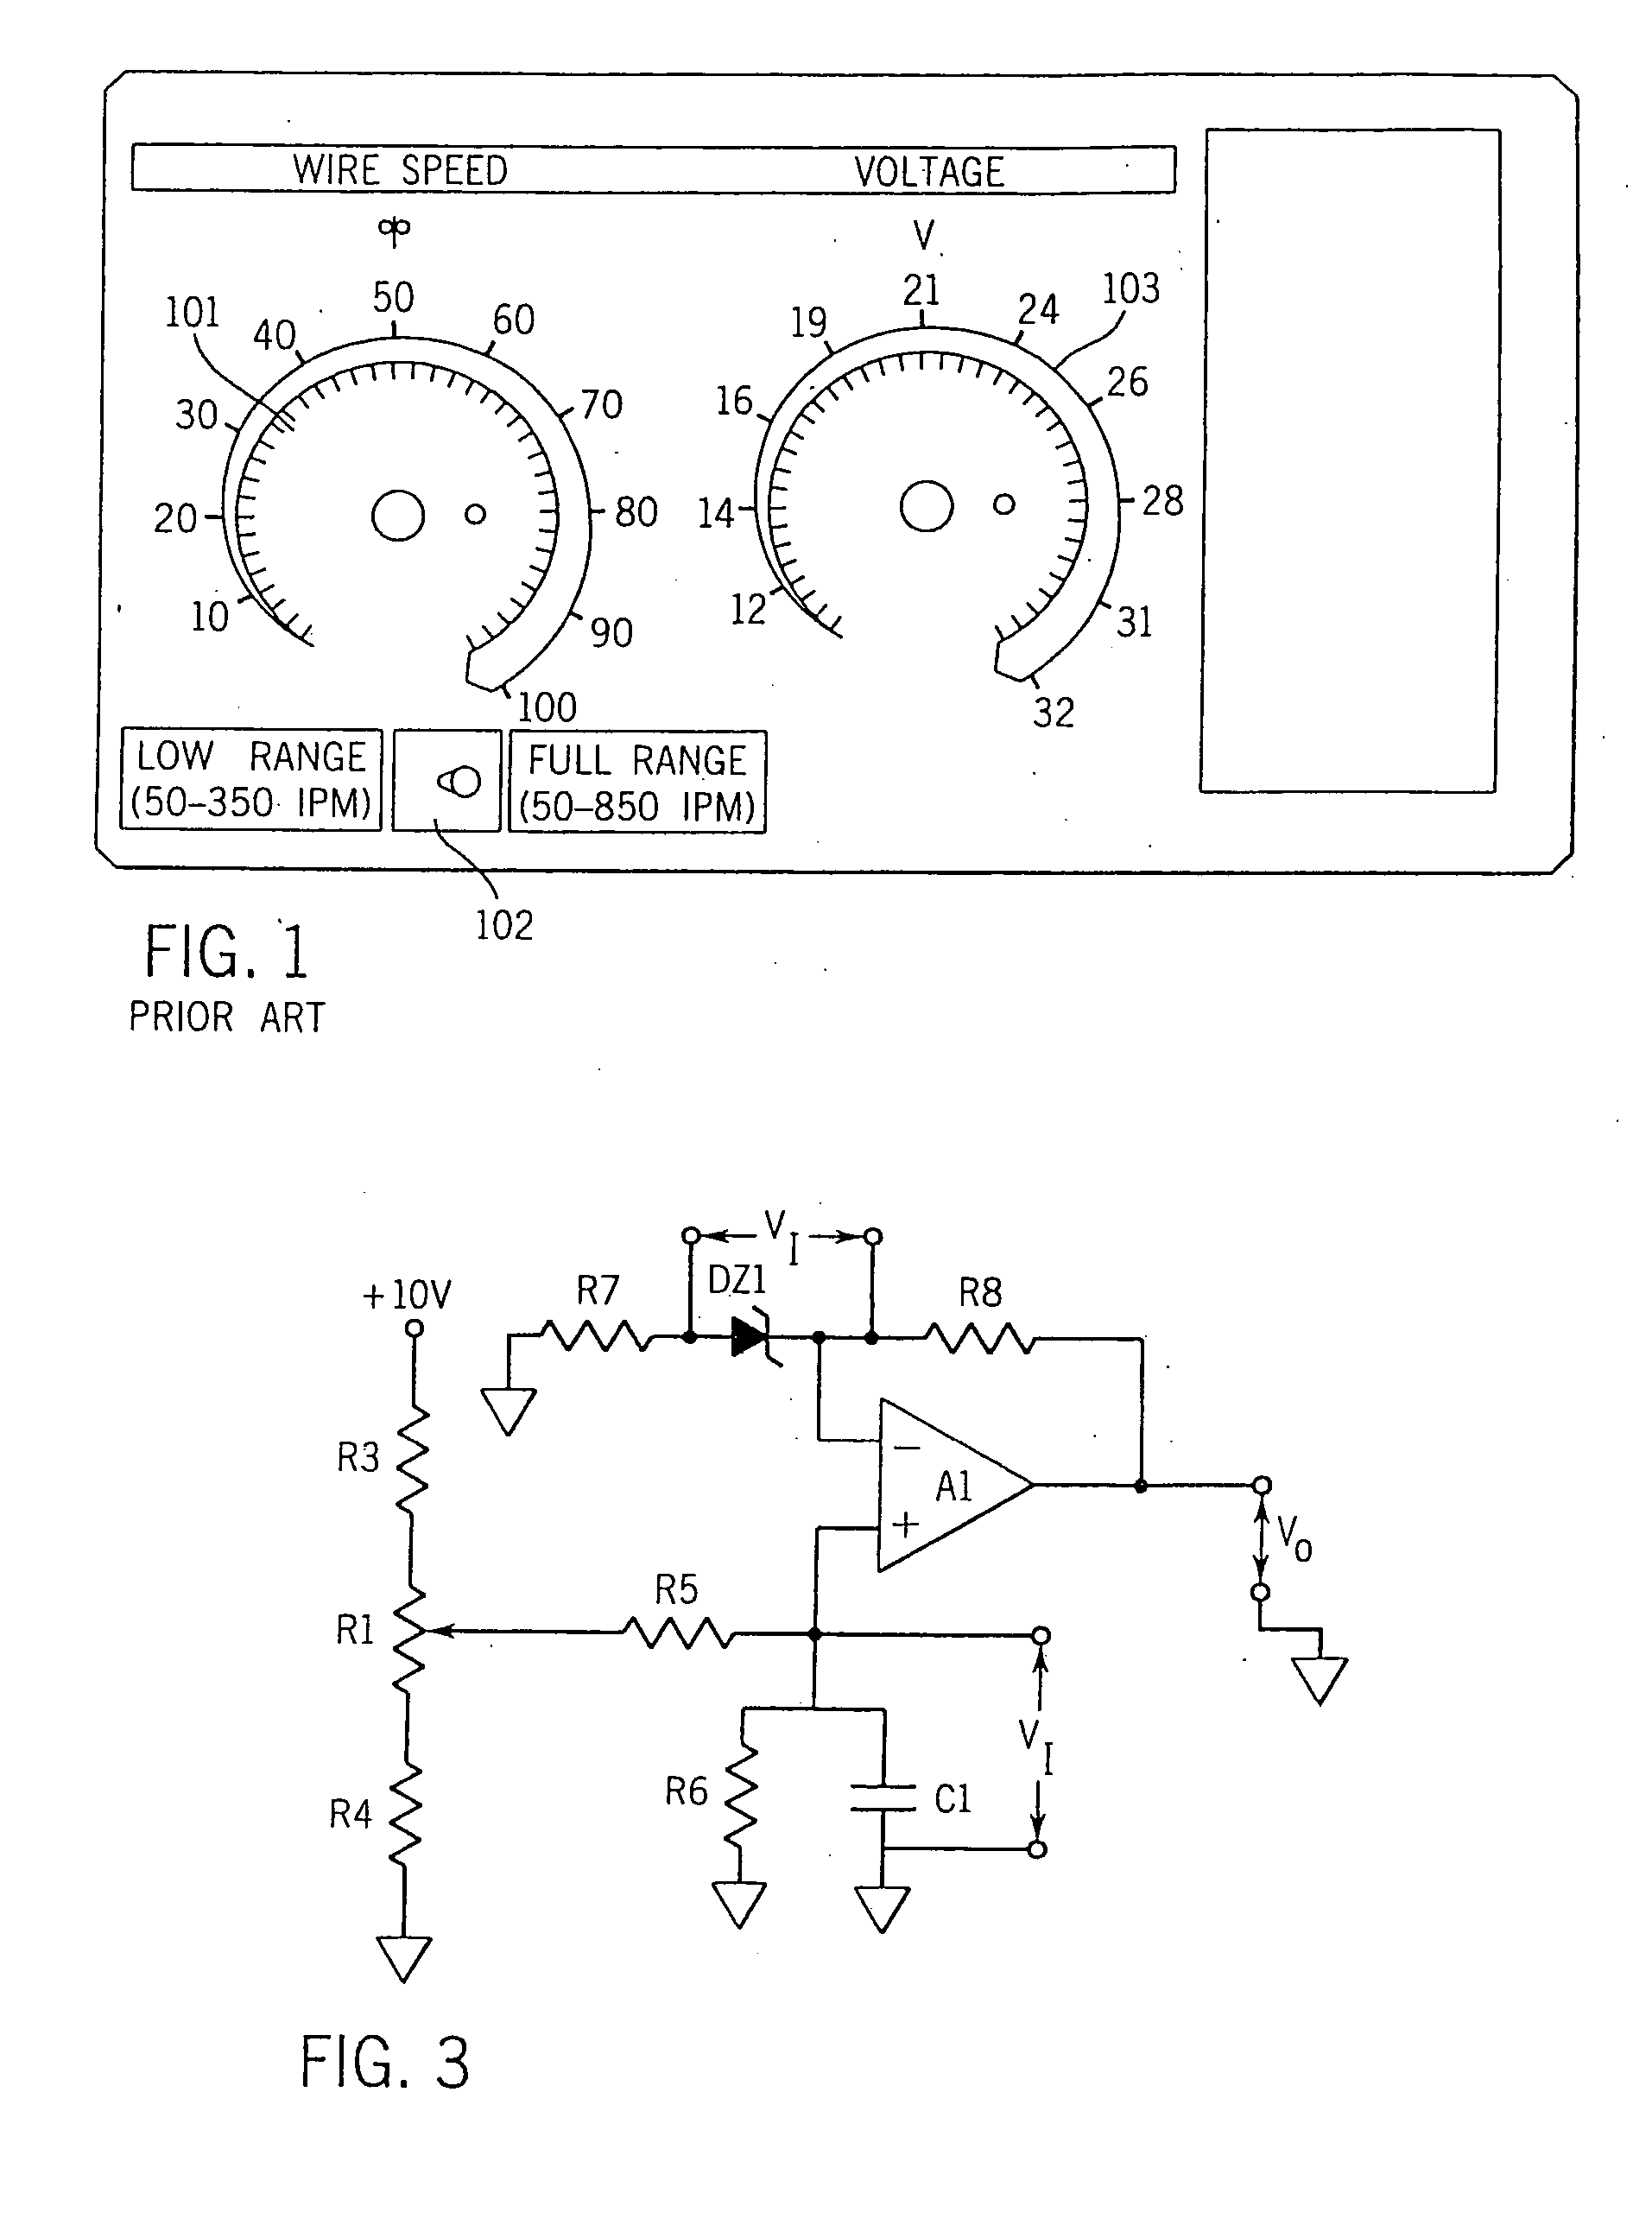 Wire feeder with non-linear speed control